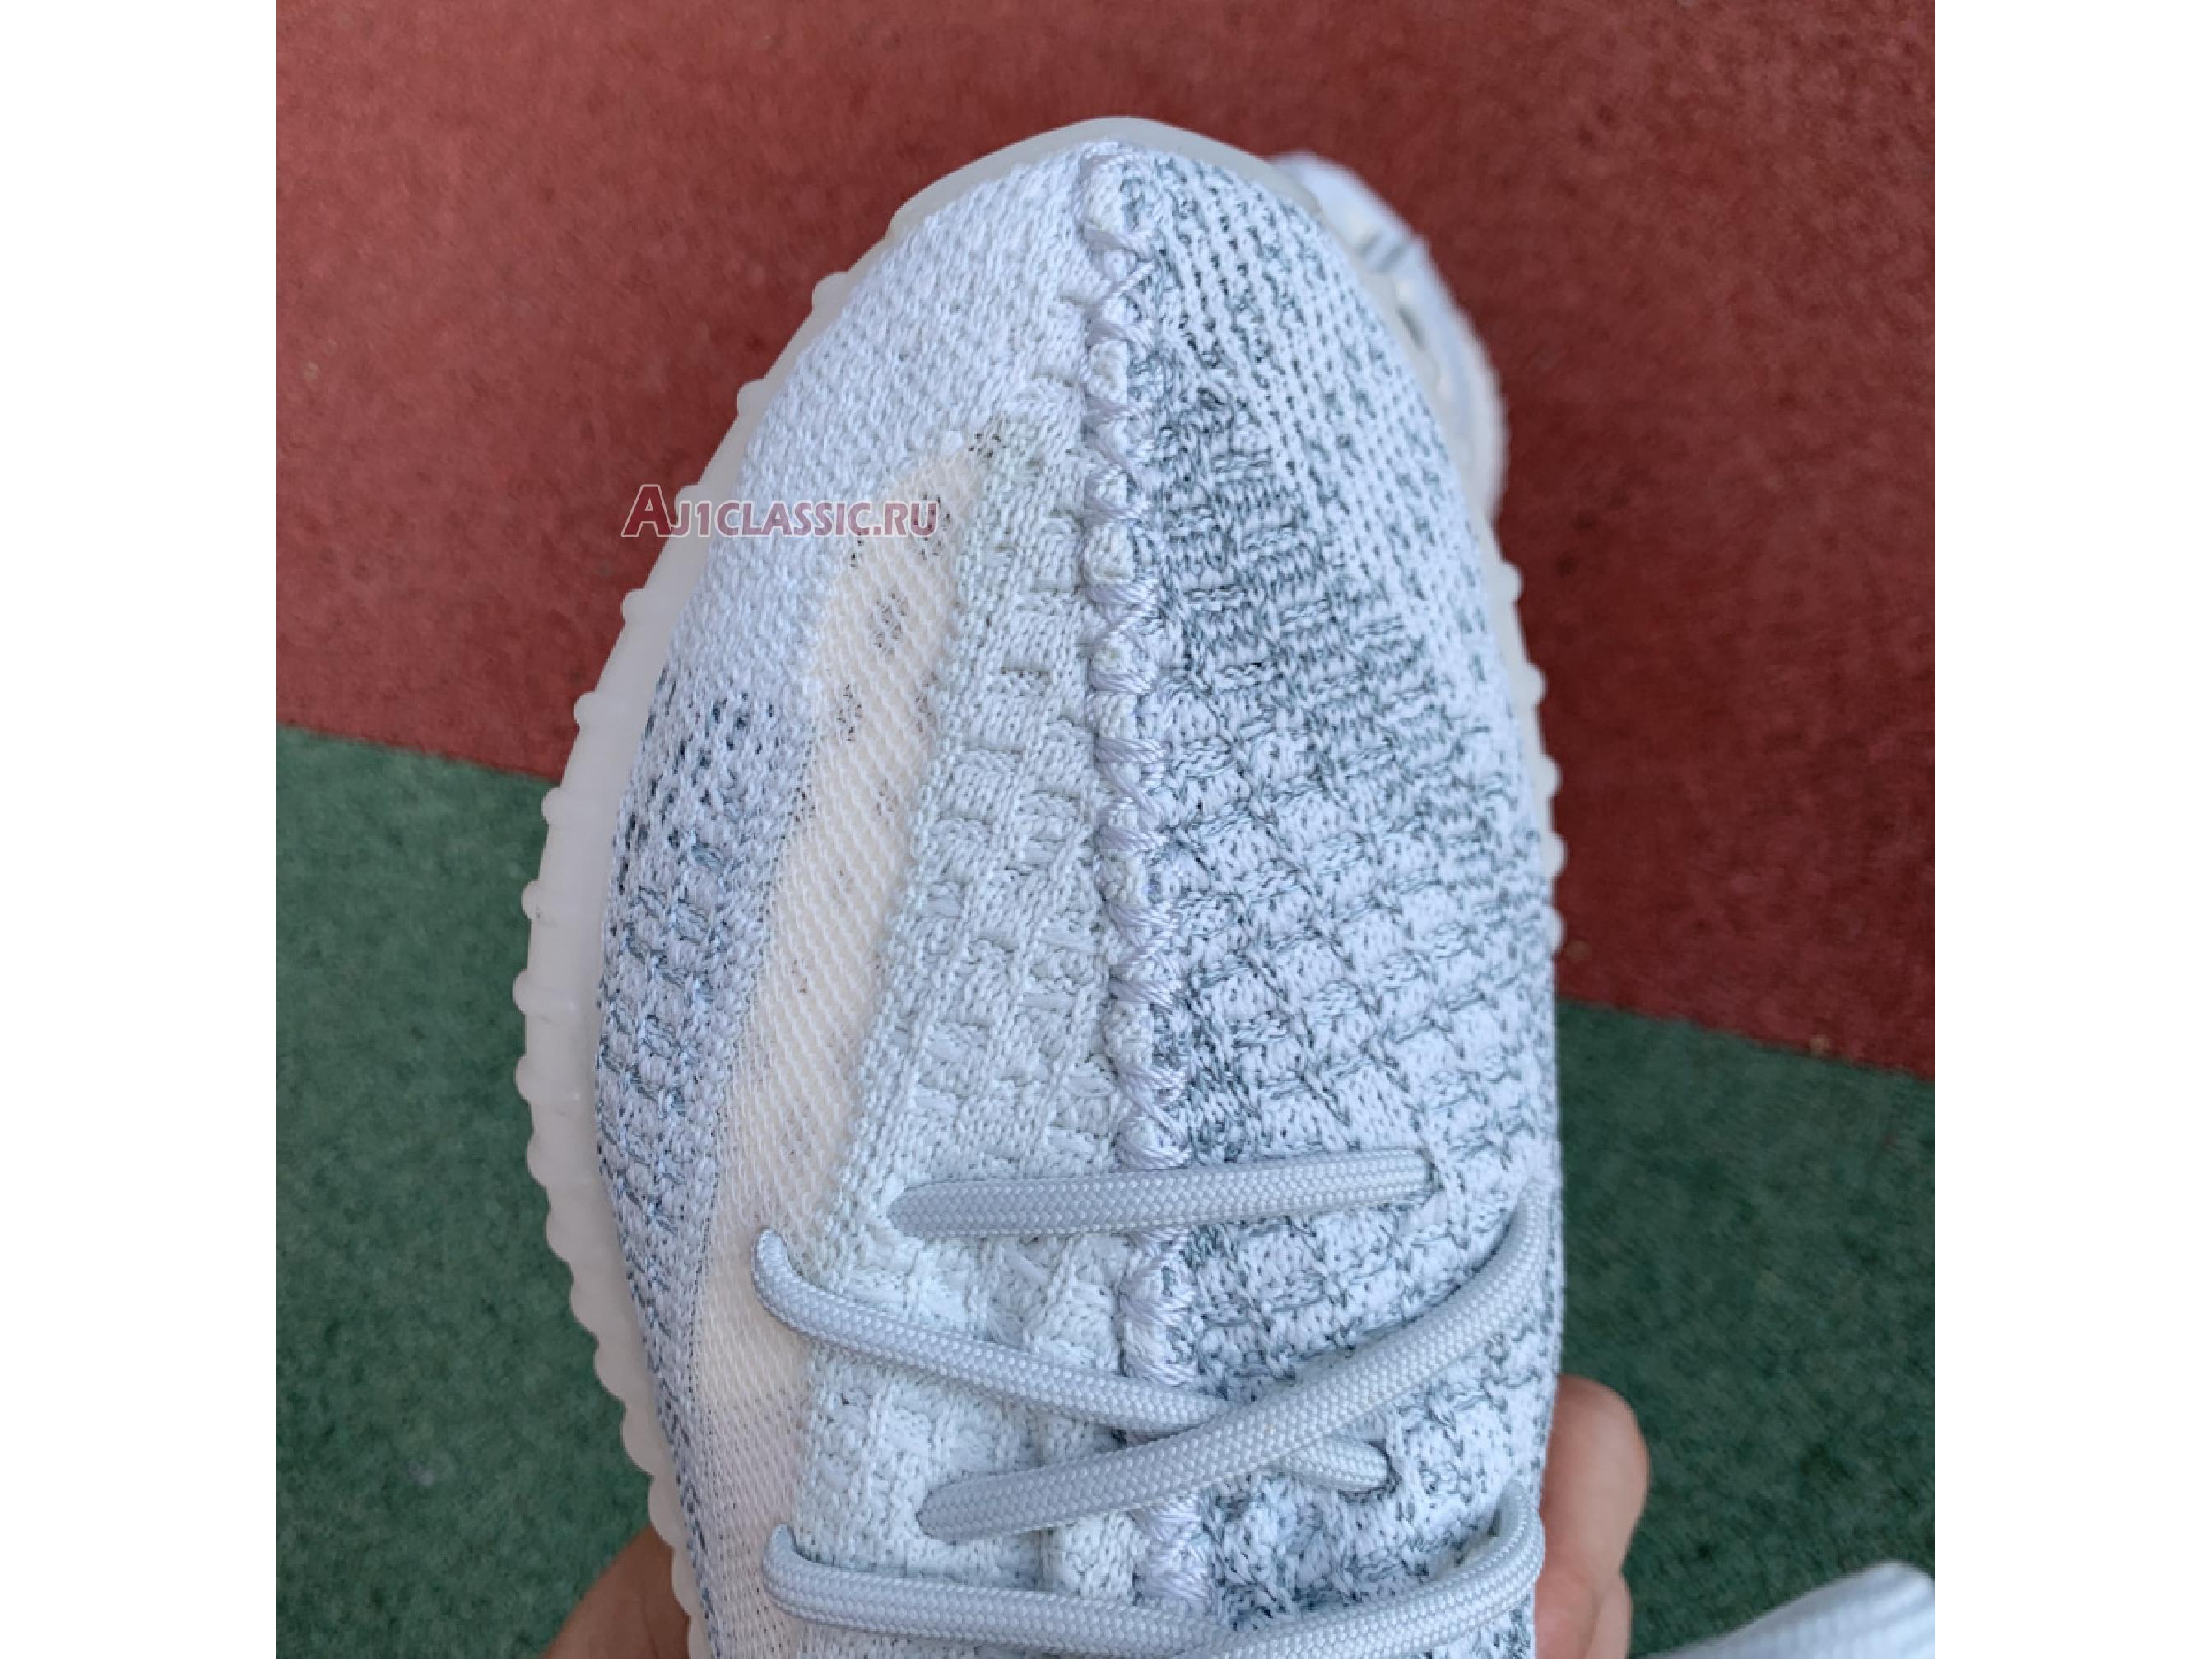 Adidas Yeezy Boost 350 V2 Cloud White Reflective FW5317 Cloud White